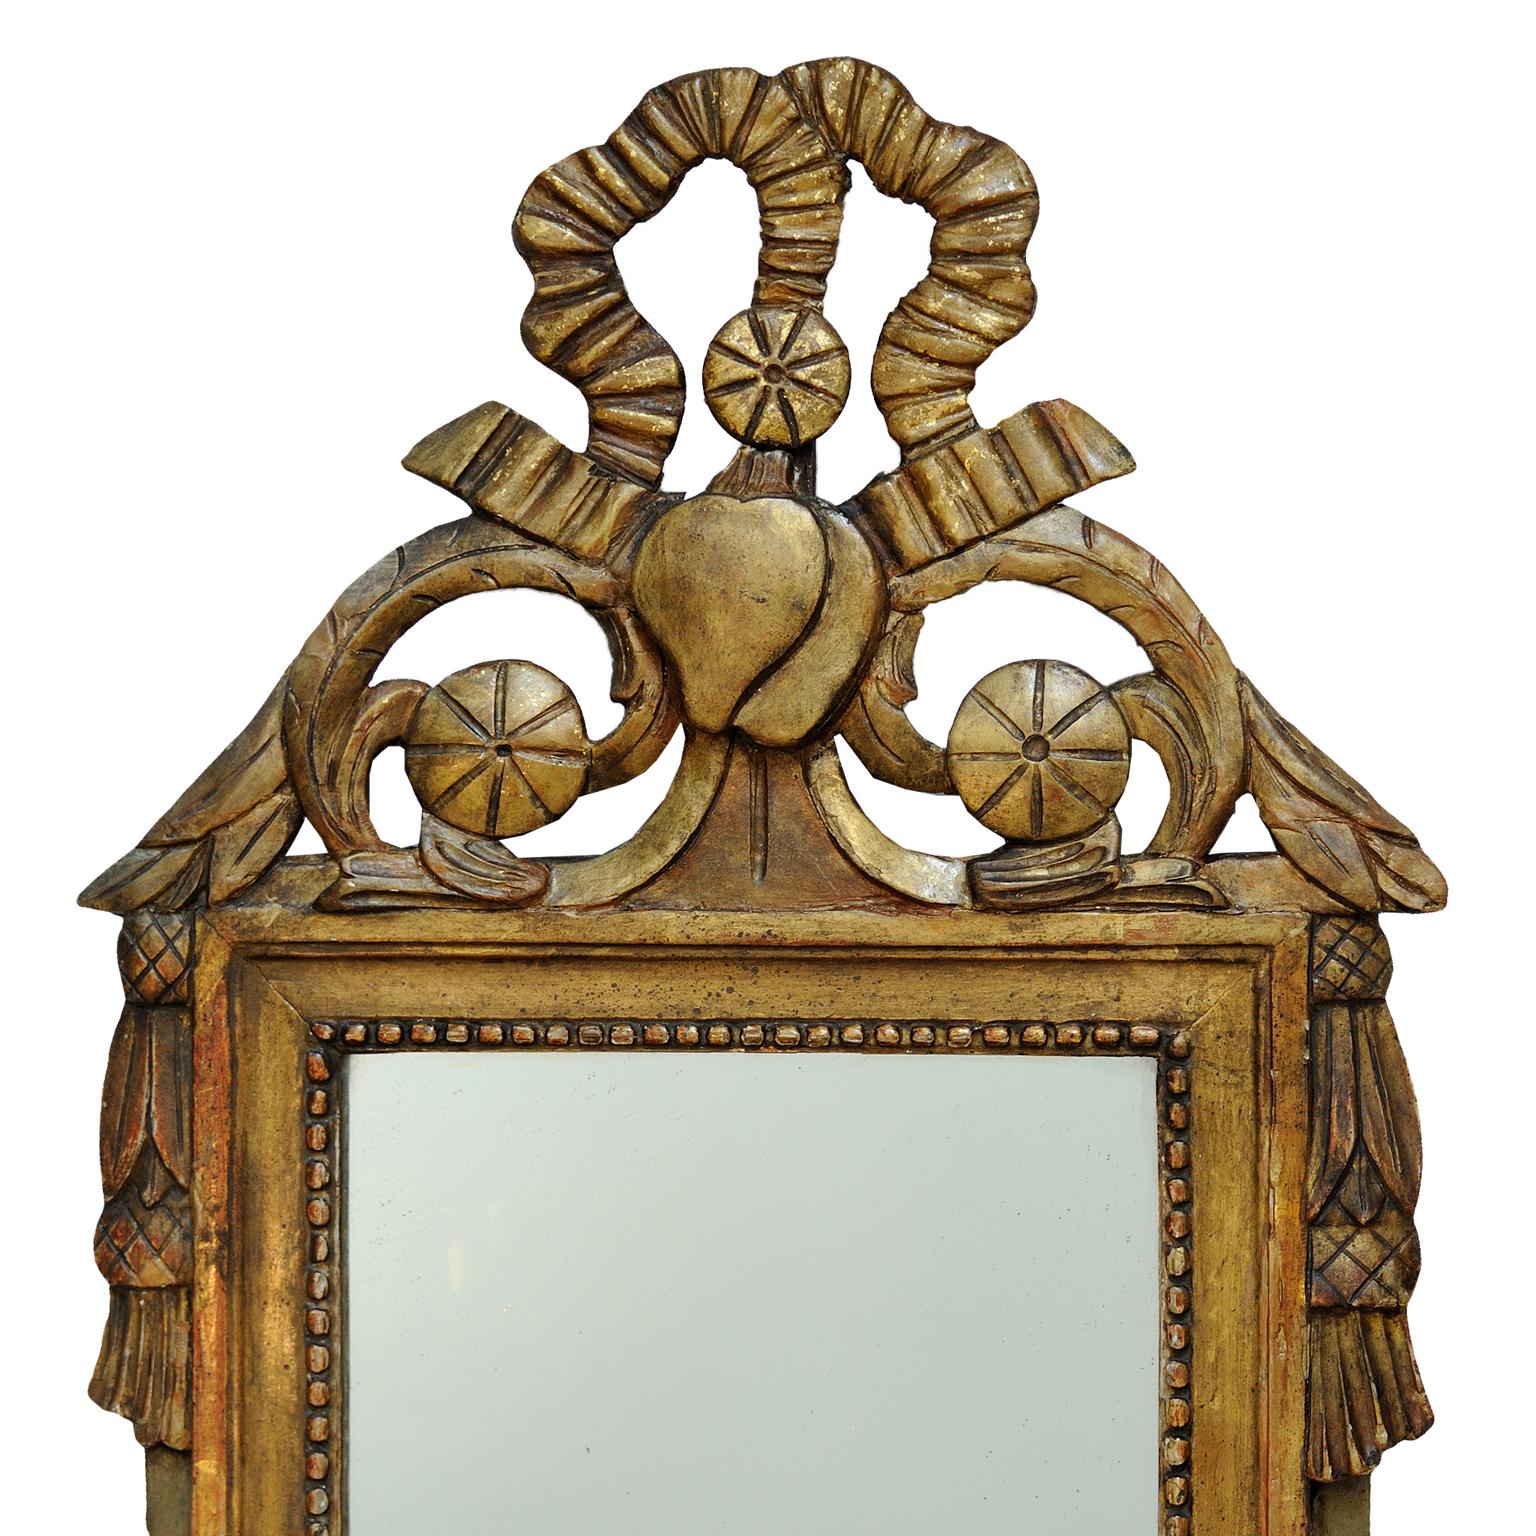 This is a really lovely small late 18th century French Louis XVI period carved giltwood and painted Mirror of great character, retaining its original mirror plate and back boards, circa 1780.